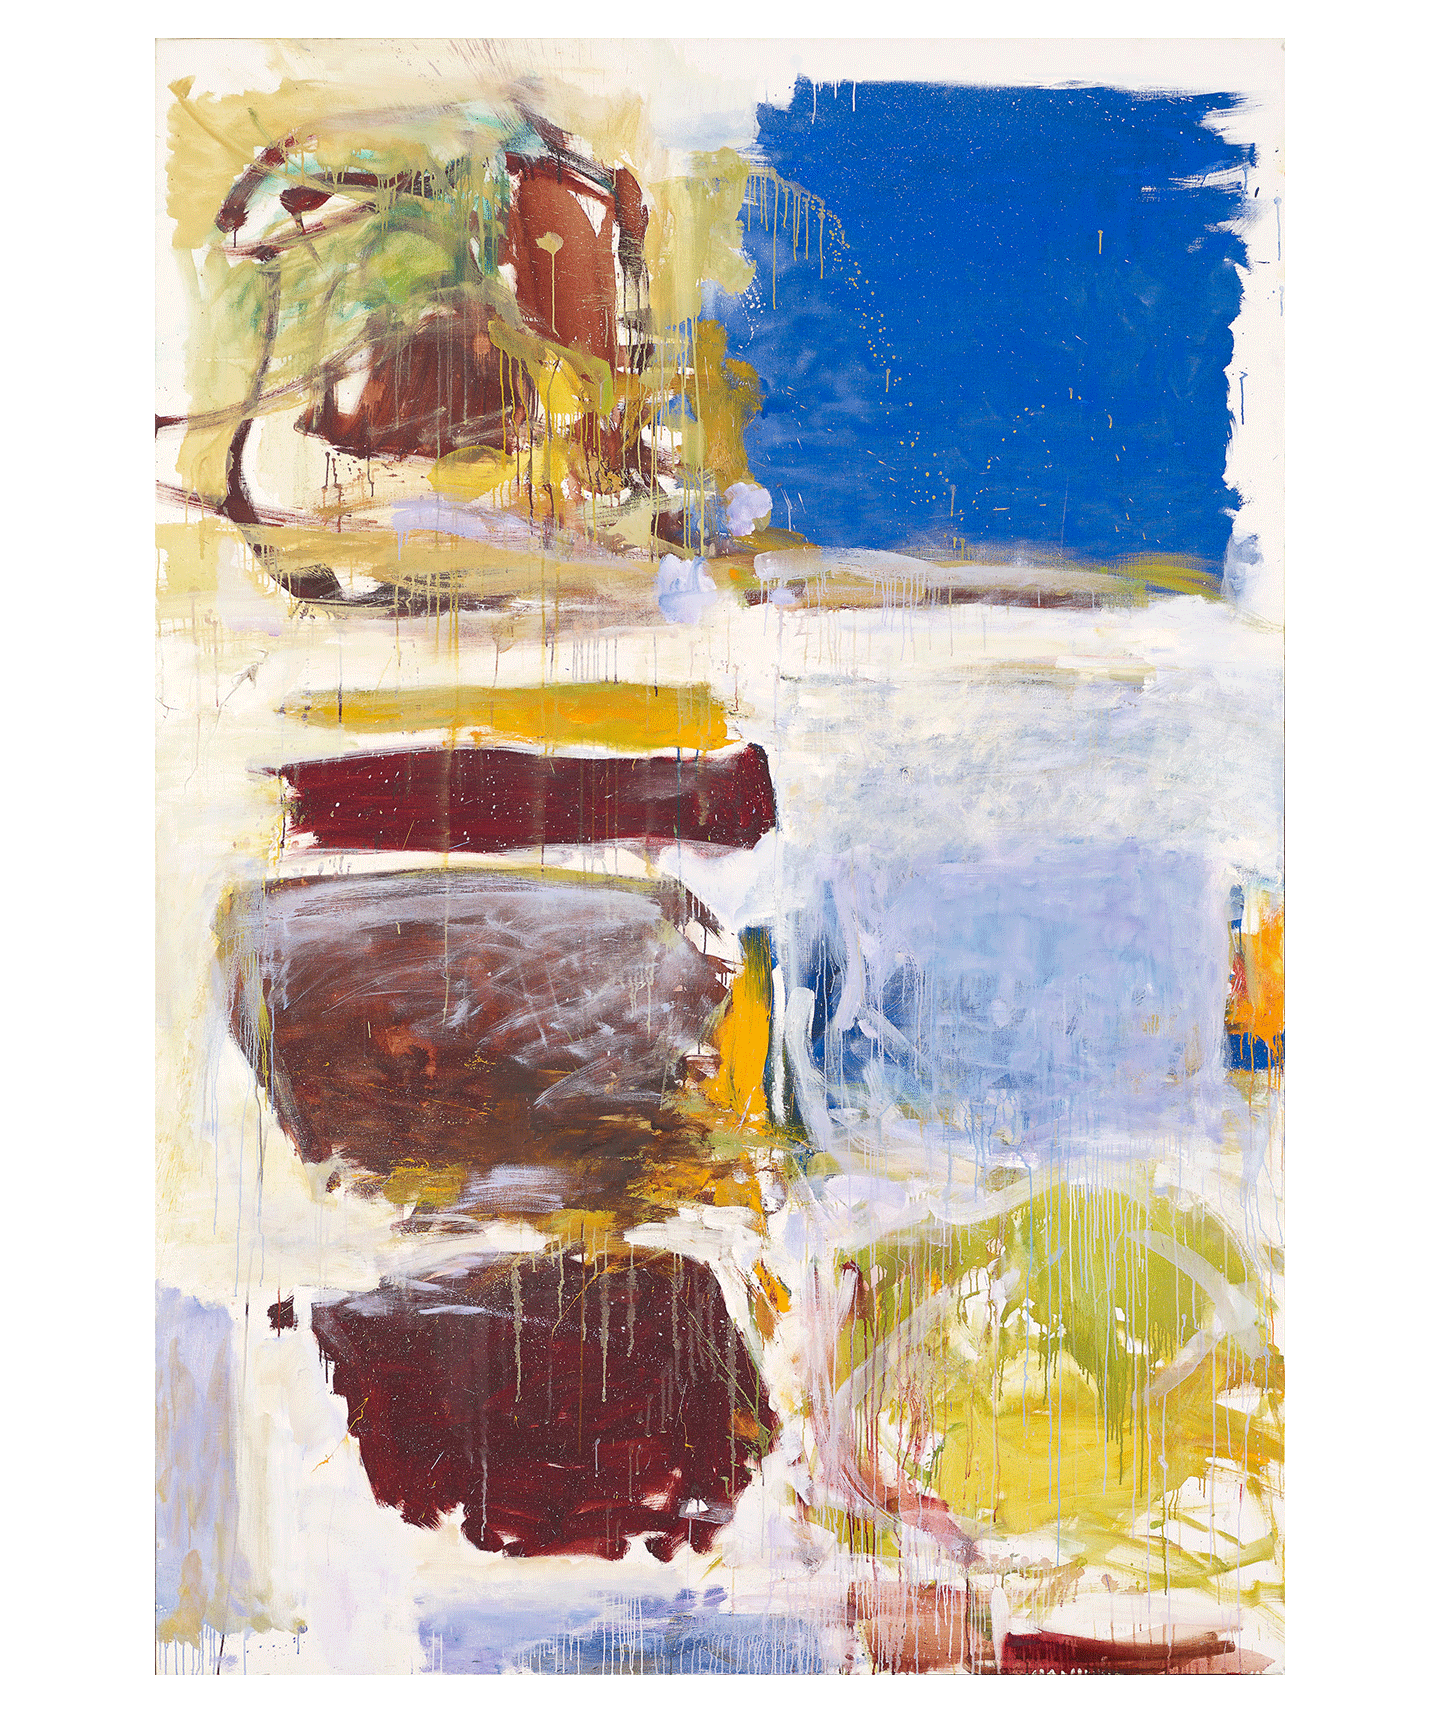 A painting by Joan Mitchell, titled Blue Territory, dated 1972.